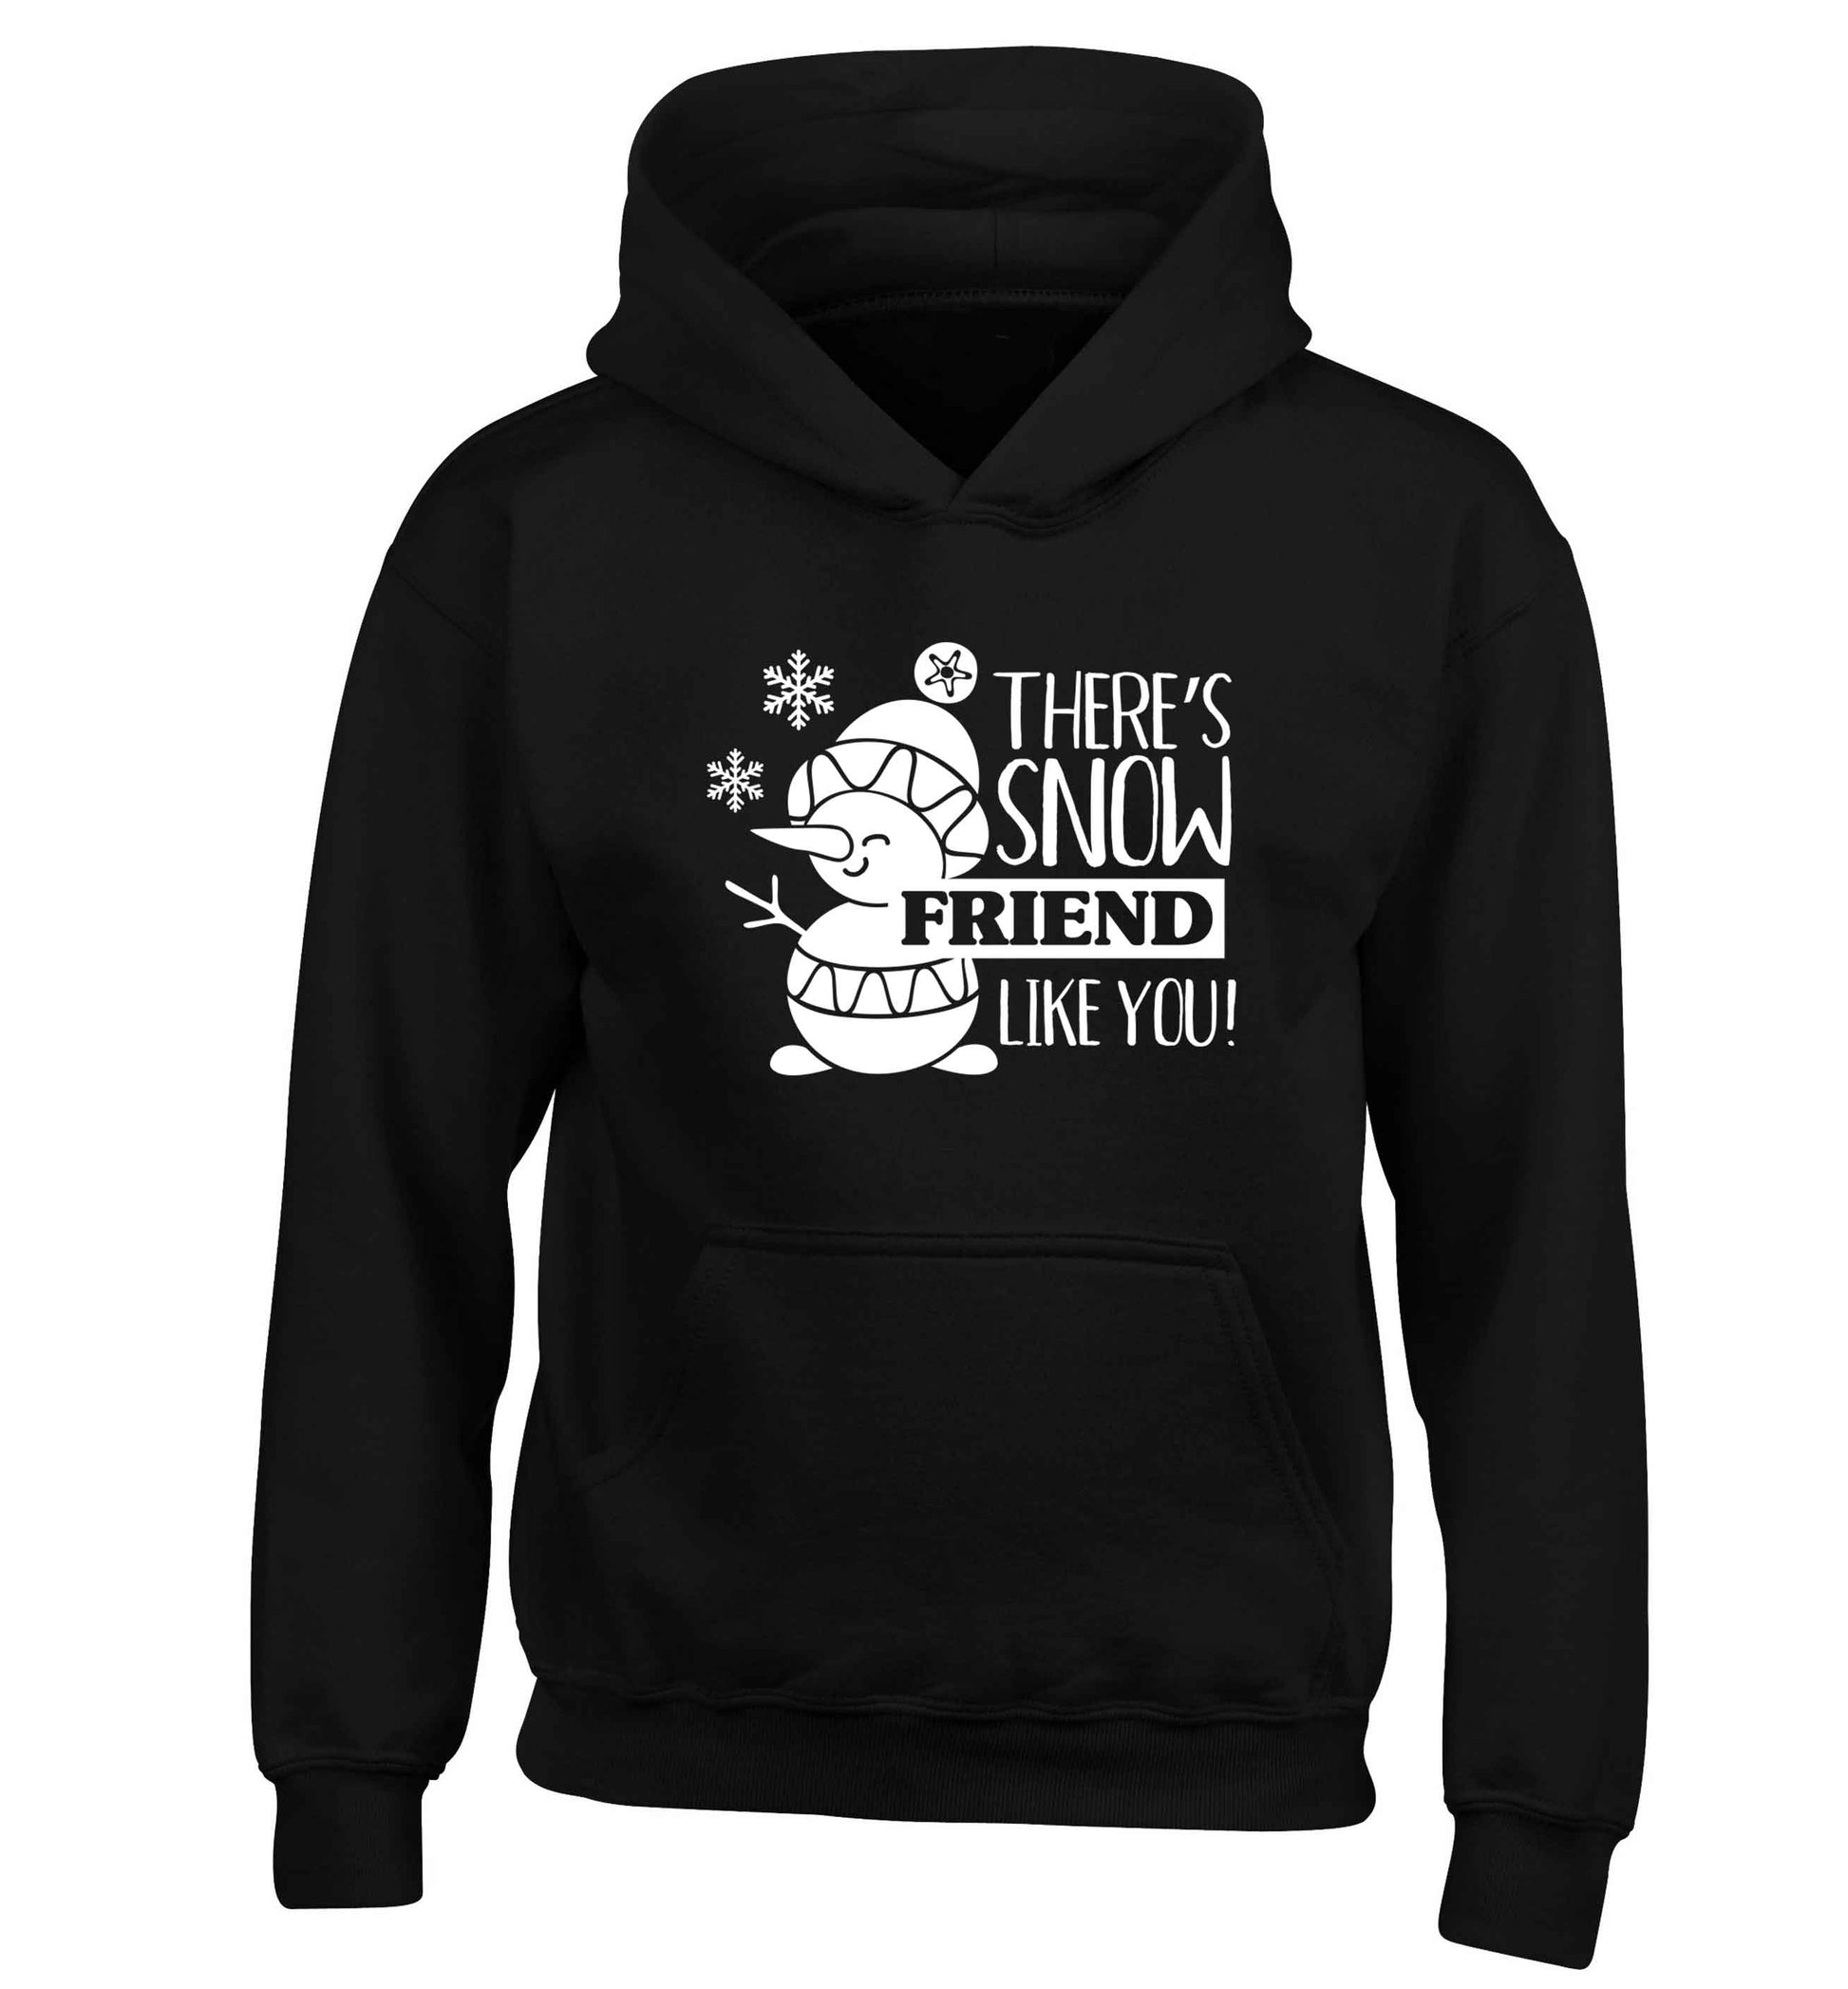 There's snow friend like you children's black hoodie 12-13 Years